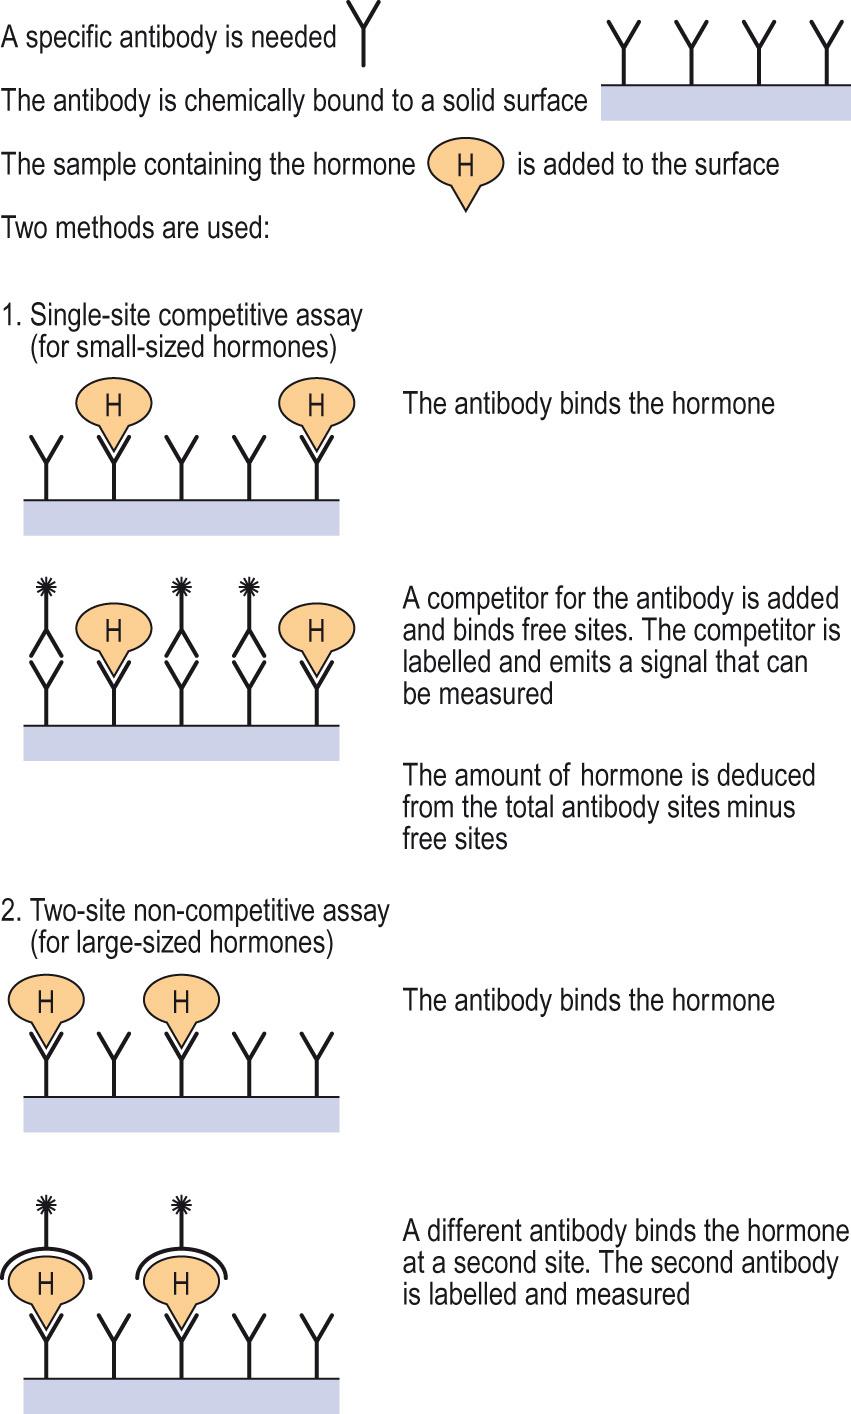 Fig. 10.9, Immunological methods for measuring hormone concentrations.